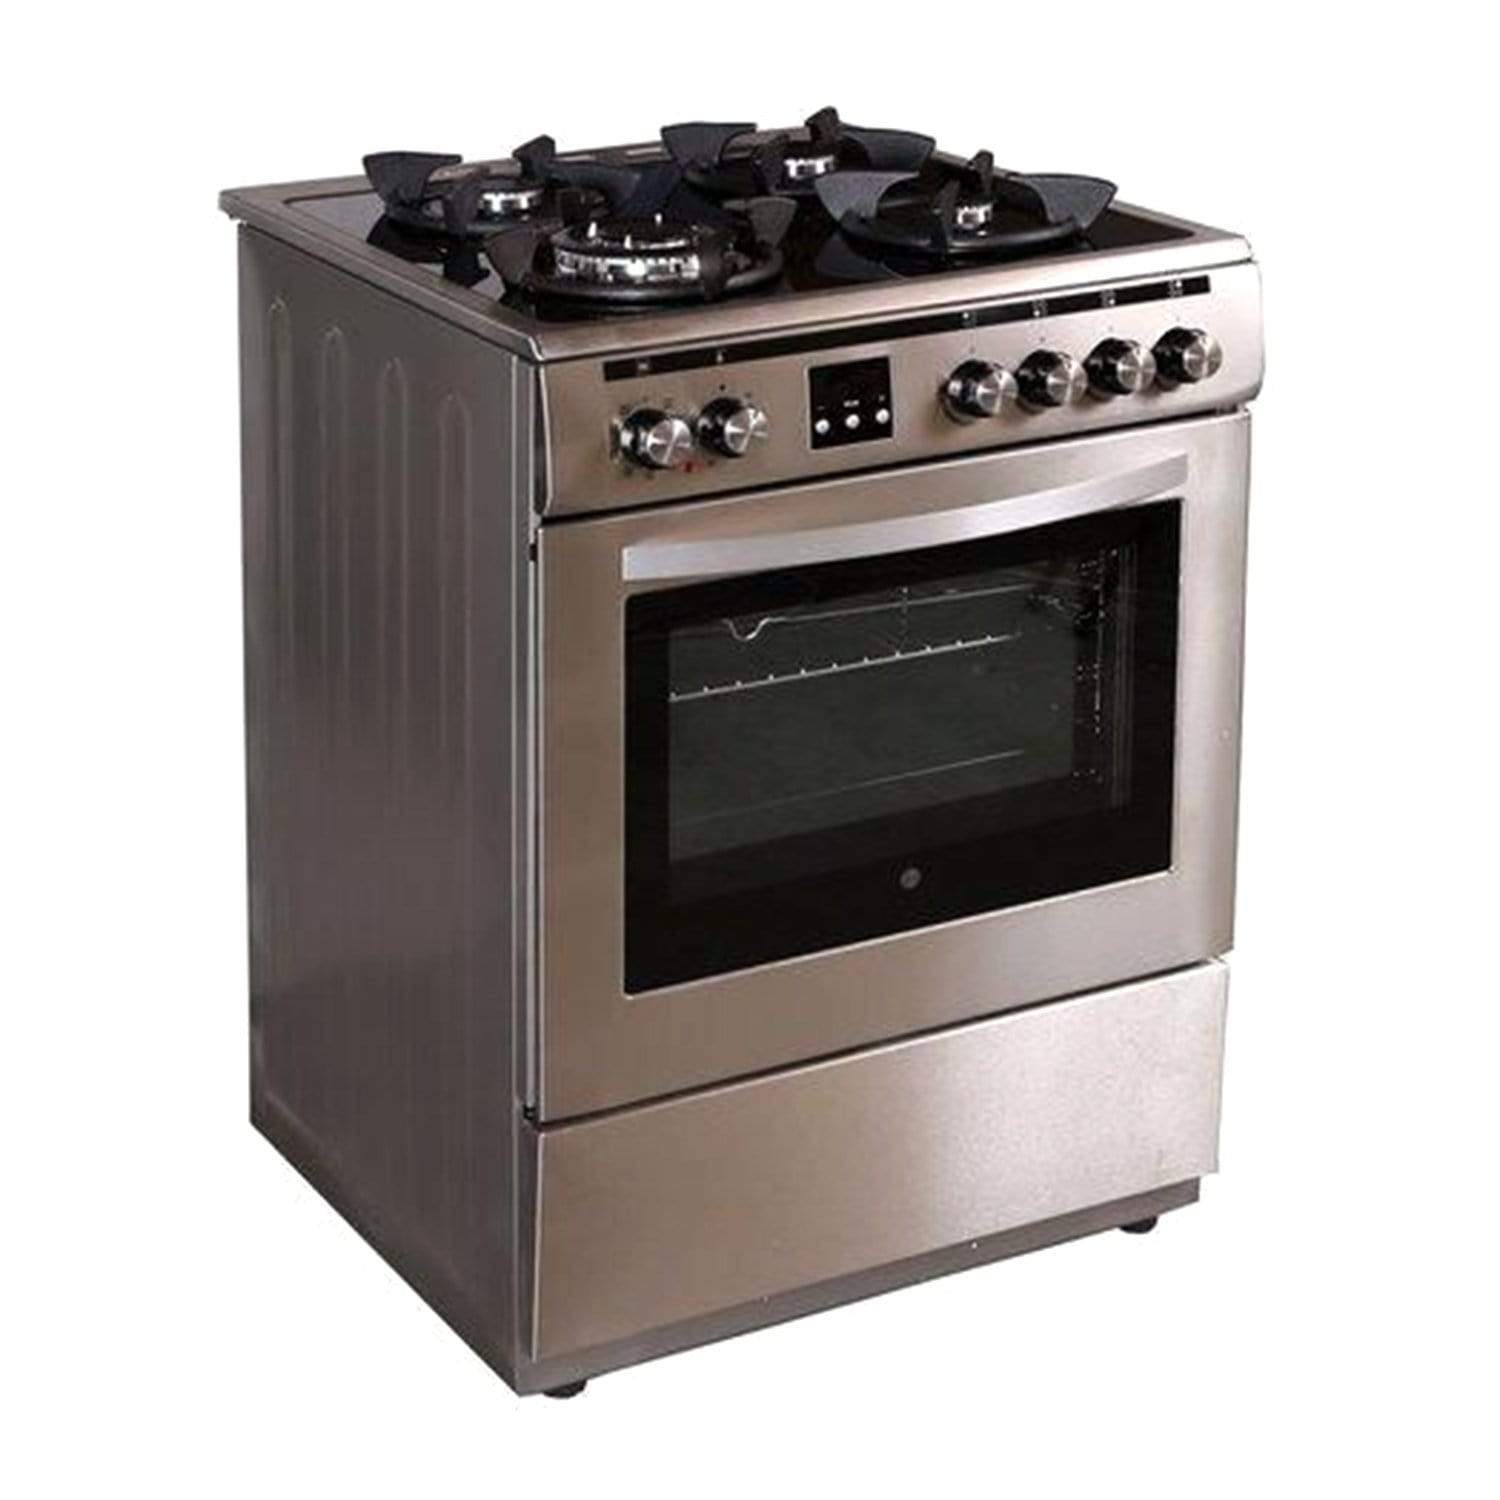 Hoover Dual Gas Cooker on Glass with Hob Electric Oven - Silver - FMC66.01S - Jashanmal Home